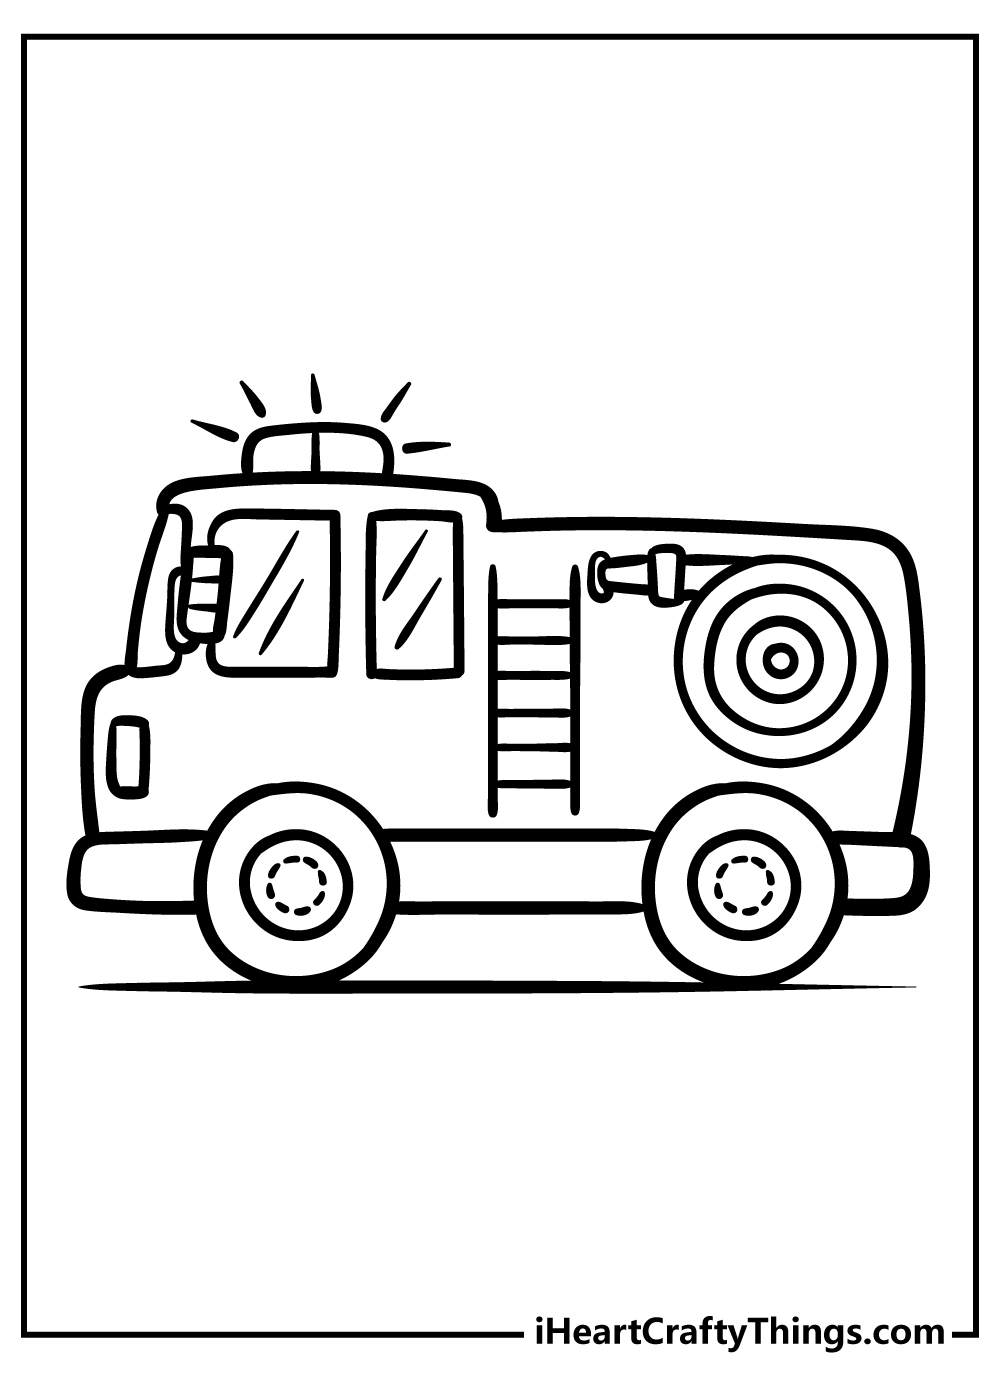 Fire truck coloring pages free printables